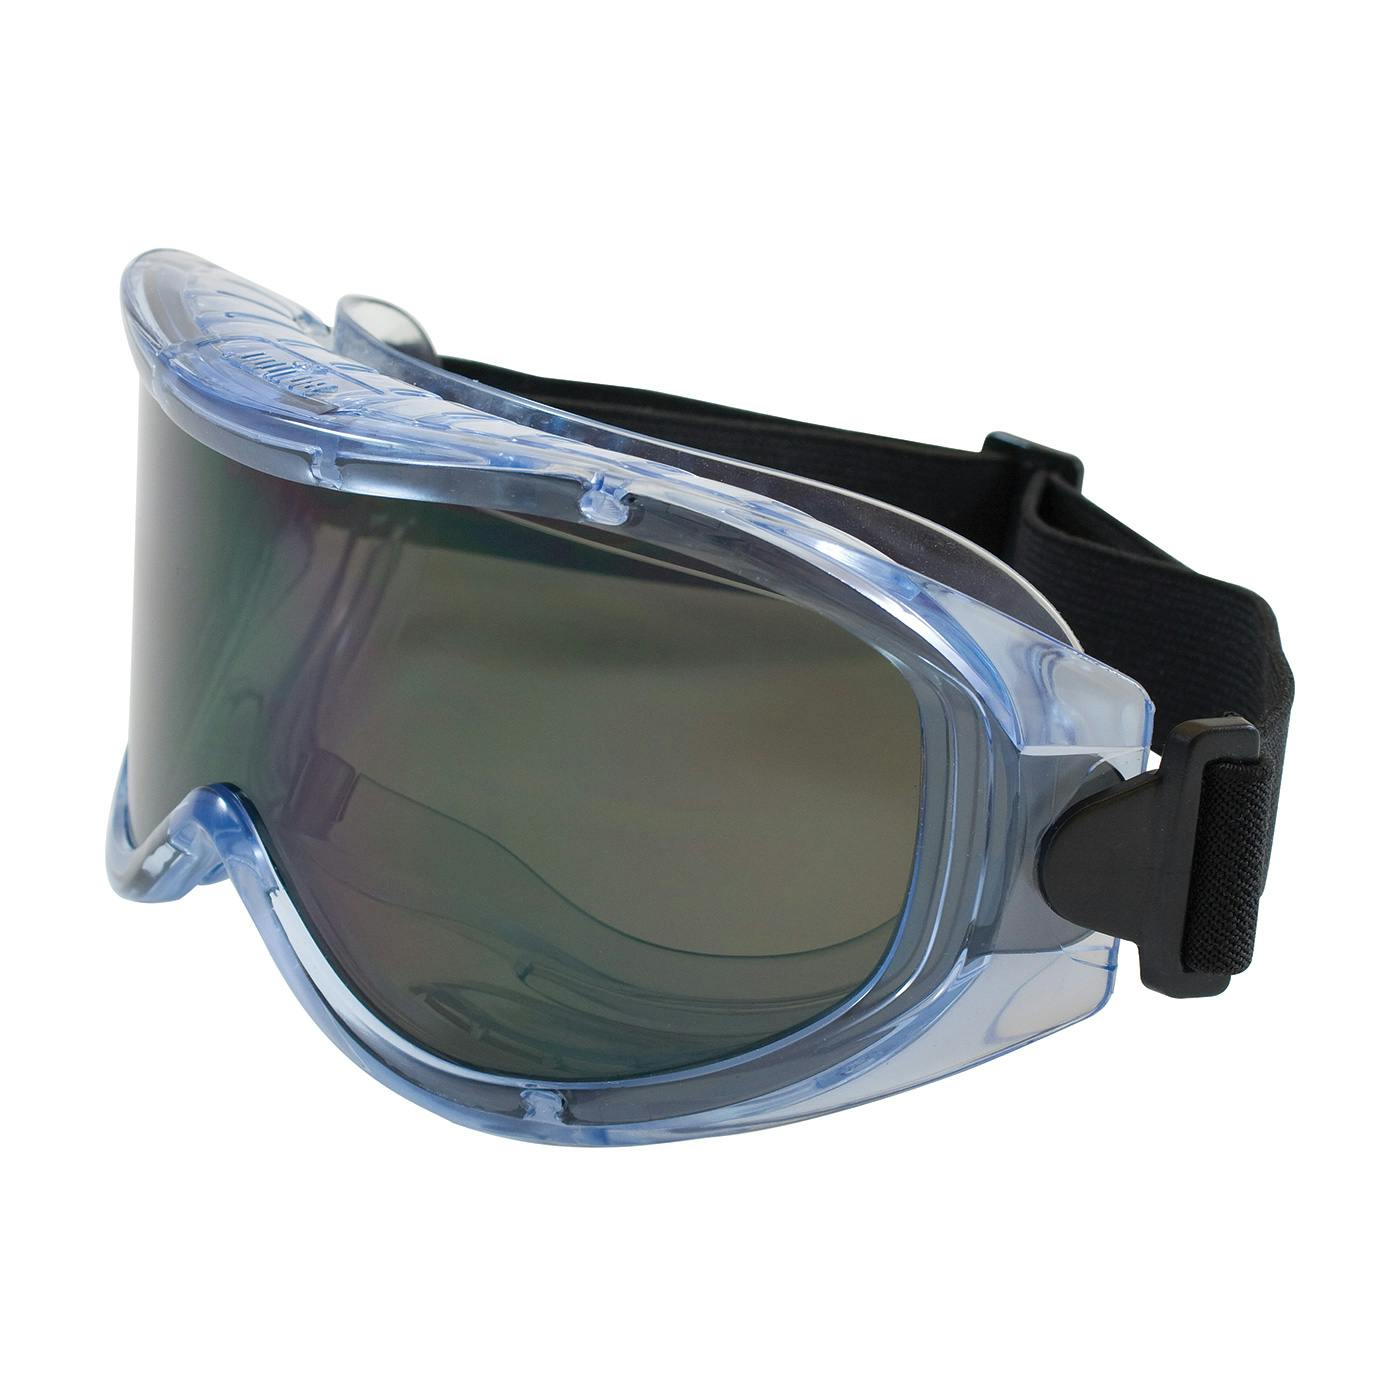 Indirect Vent Goggle with Light Blue Body, Grey Lens and Anti-Scratch / Anti-Fog Coating, Light Blue (251-5300-402) - OS_0